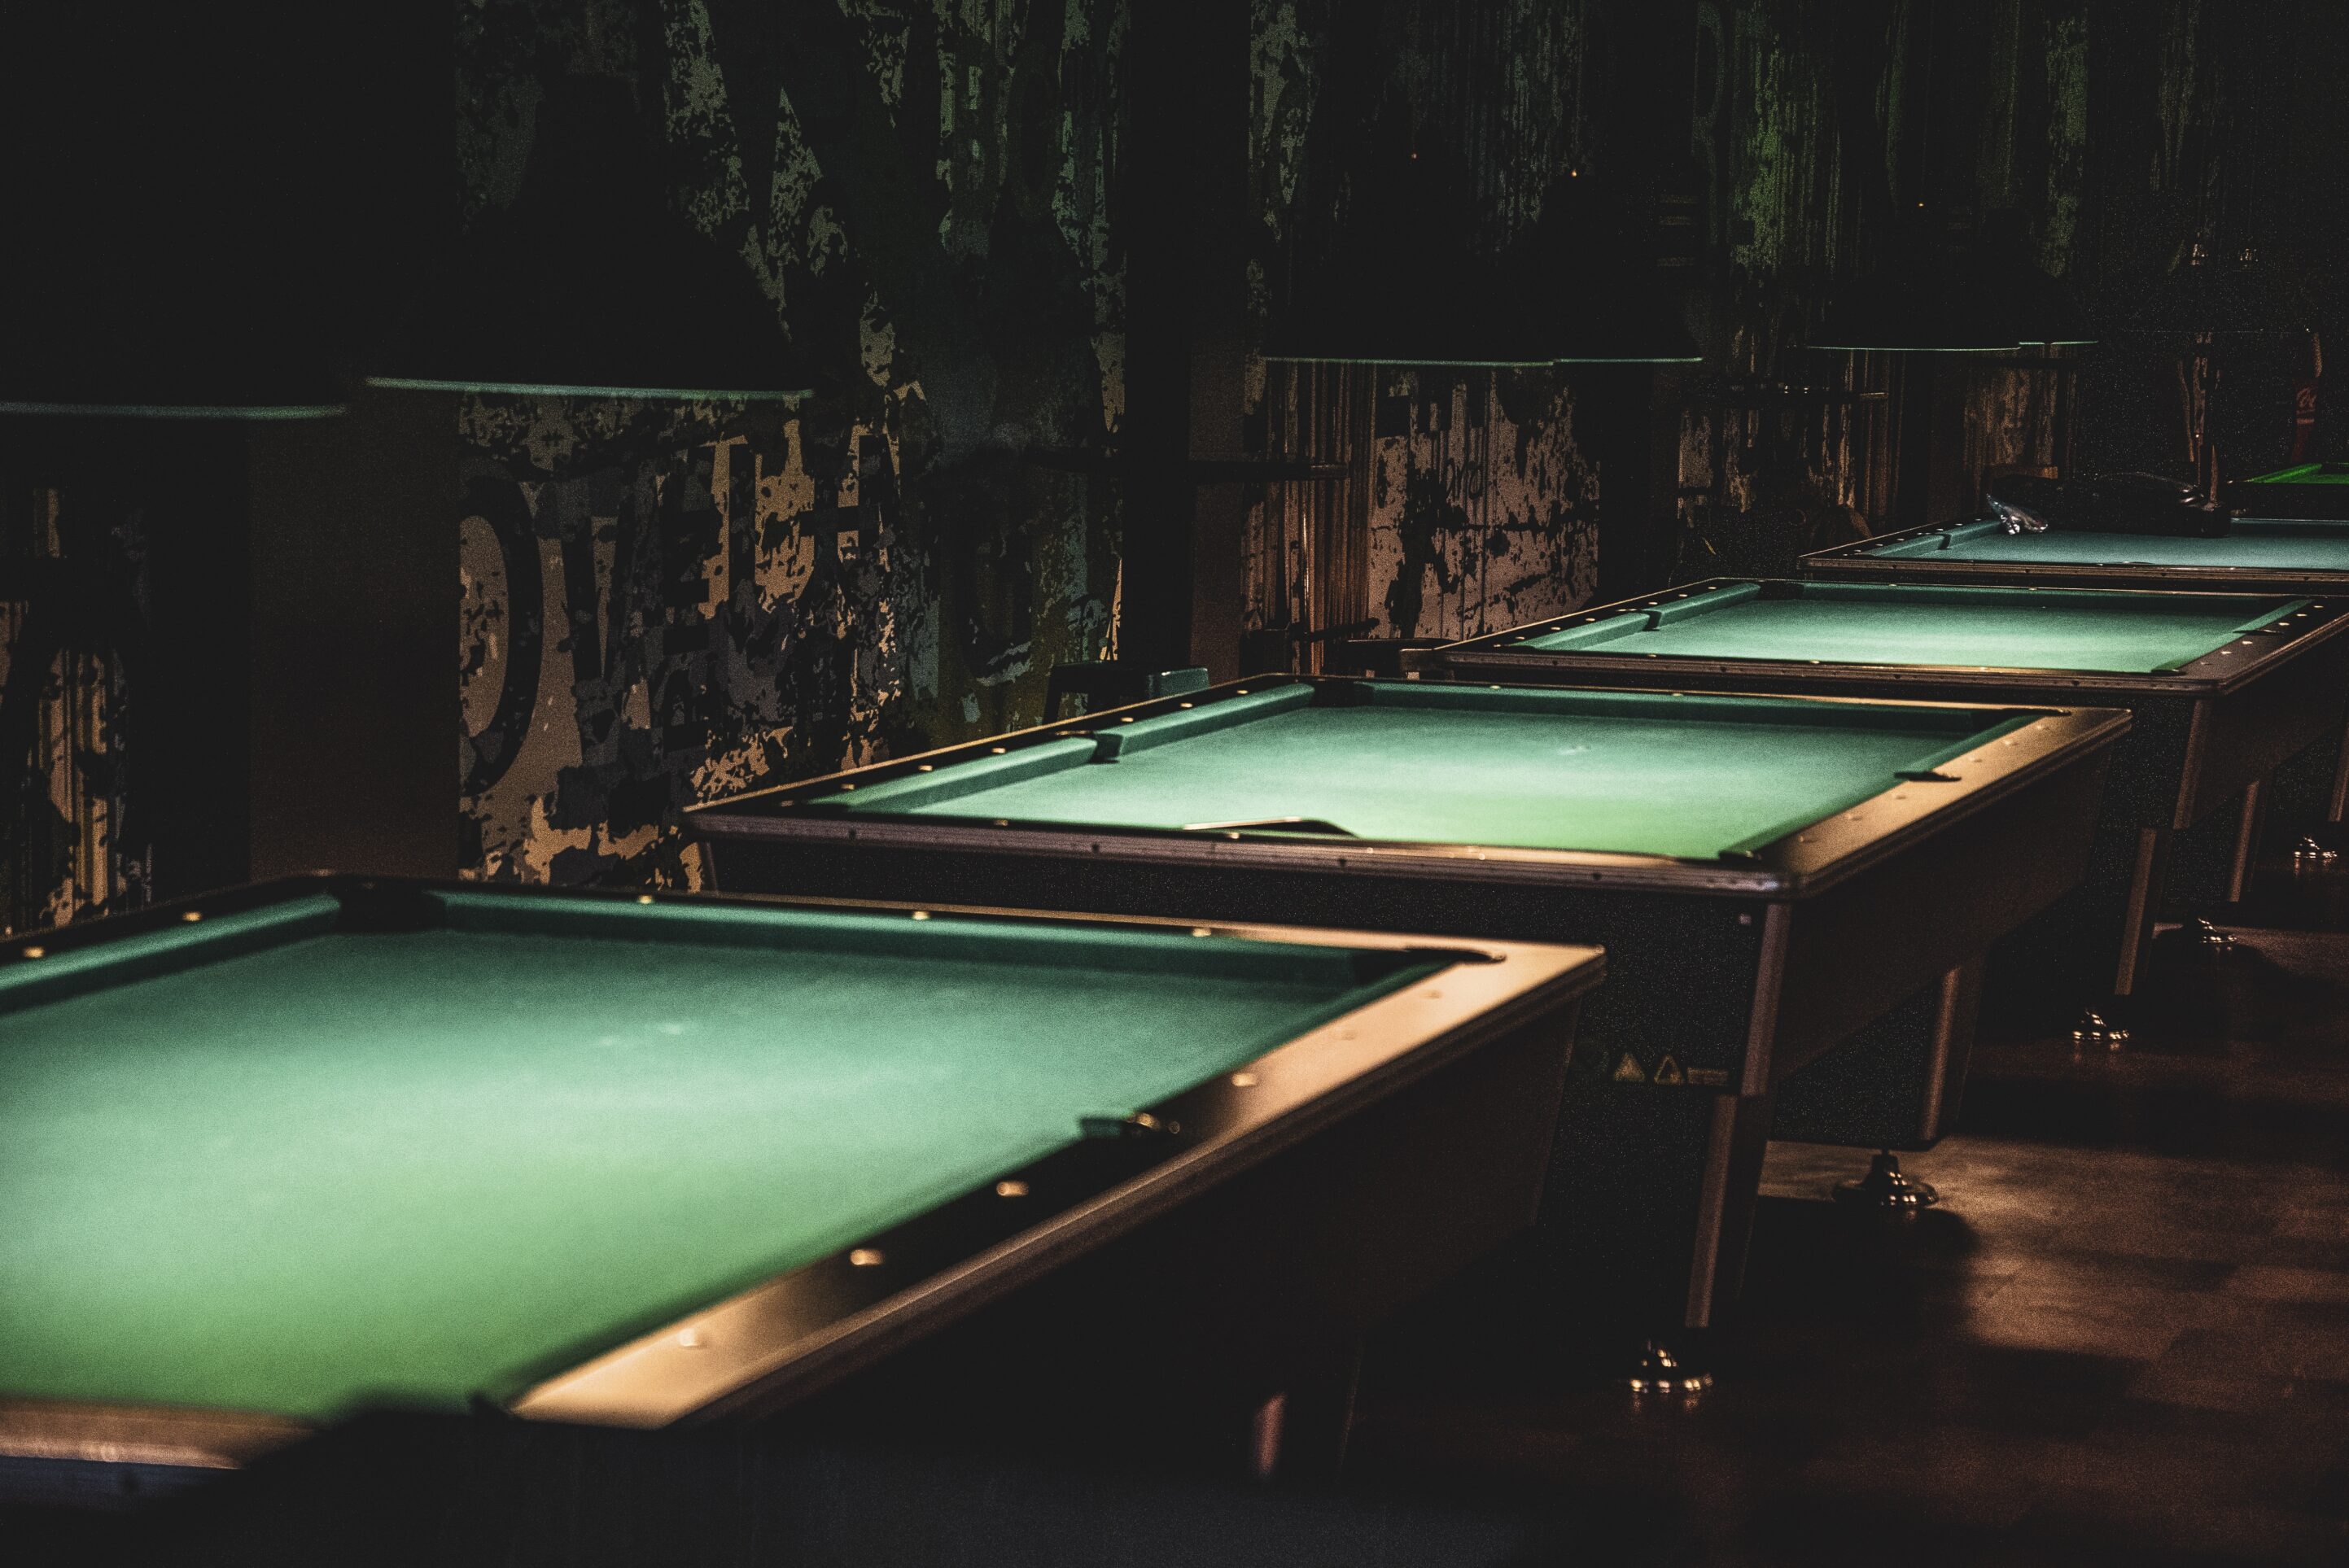 Pool tables in bar